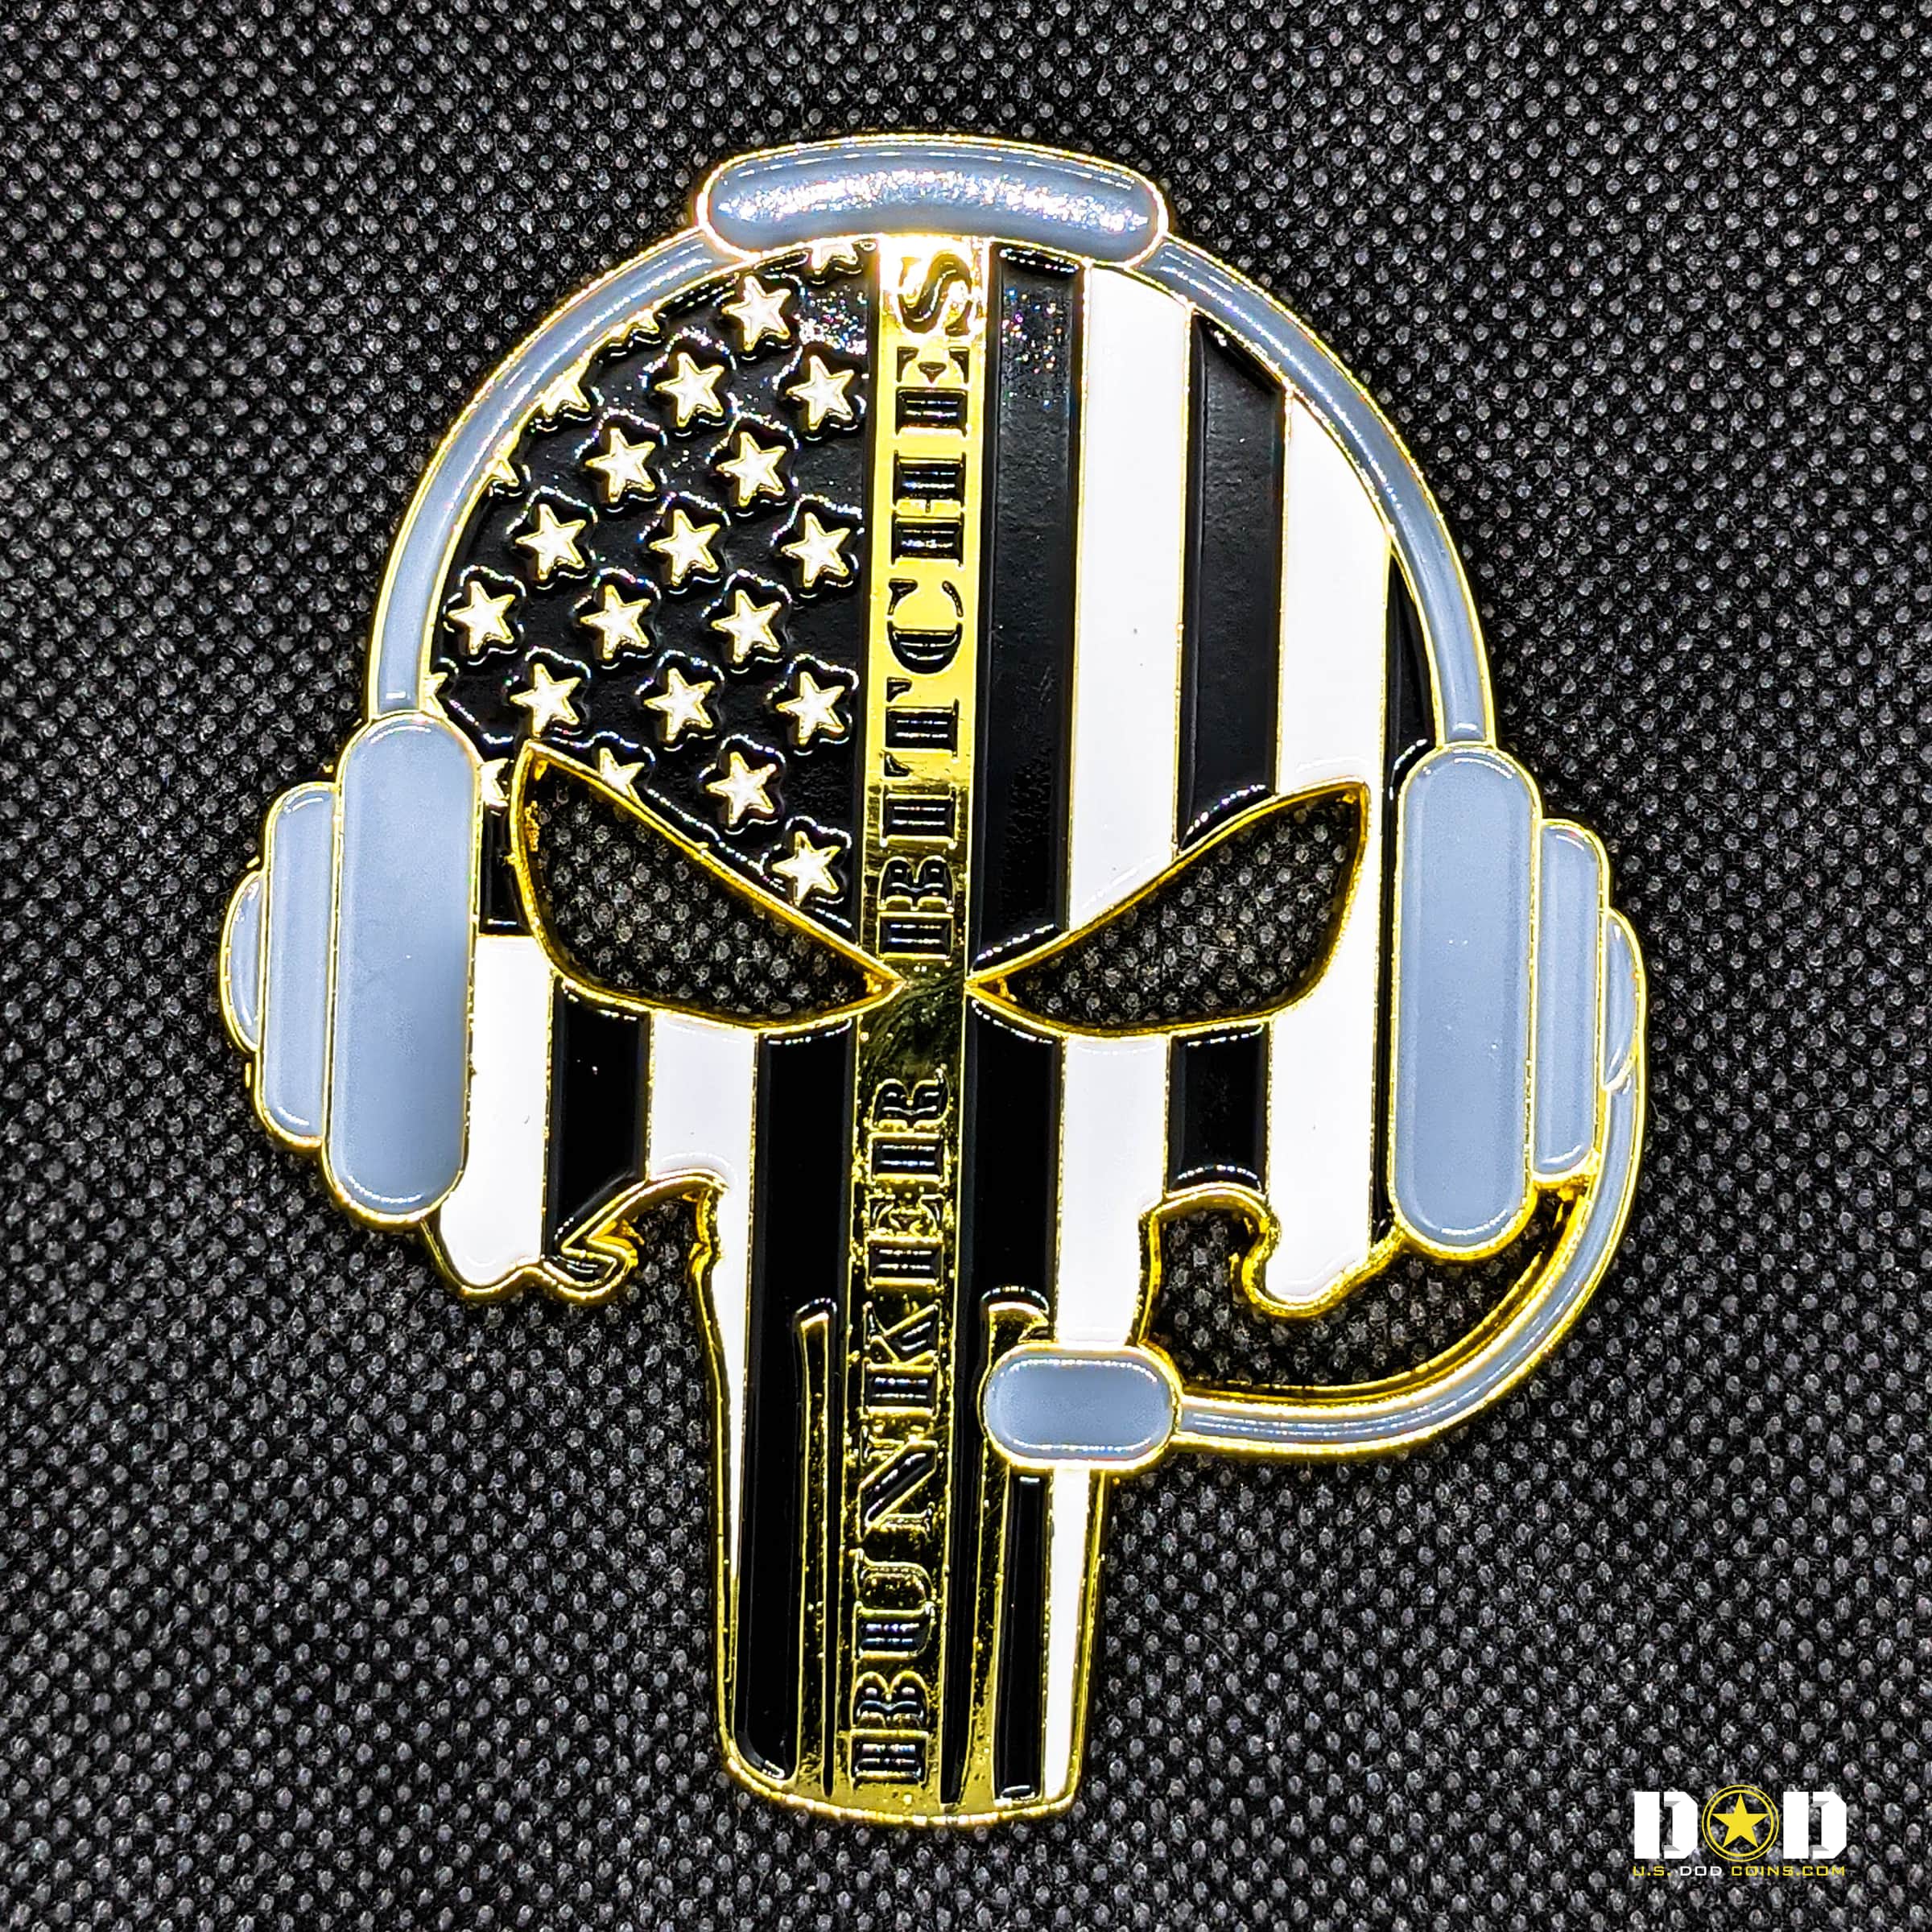 Bunker-Bitches-Carrolll-County-EC-Punisher-Skull-Challenge-Coin_0002_USDODCoins-Challenge-Coins-Examples-21 (1)